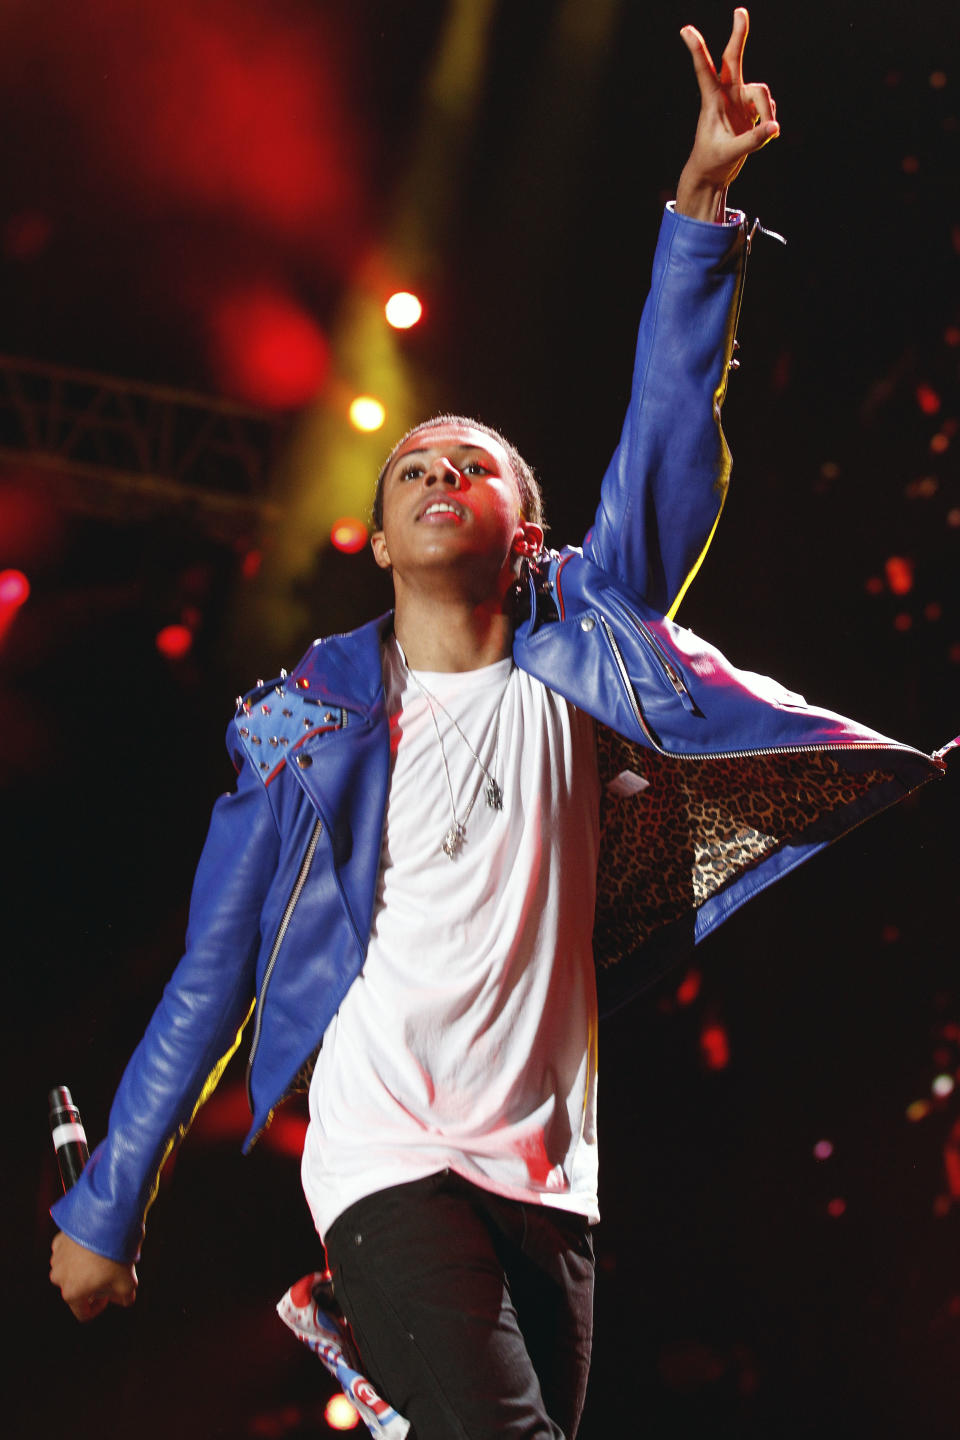 Diggy Simmons performs at the Essence Music Festival in New Orleans, Thursday, July 5, 2012. (Photo by Bill Haber/Invision/AP)